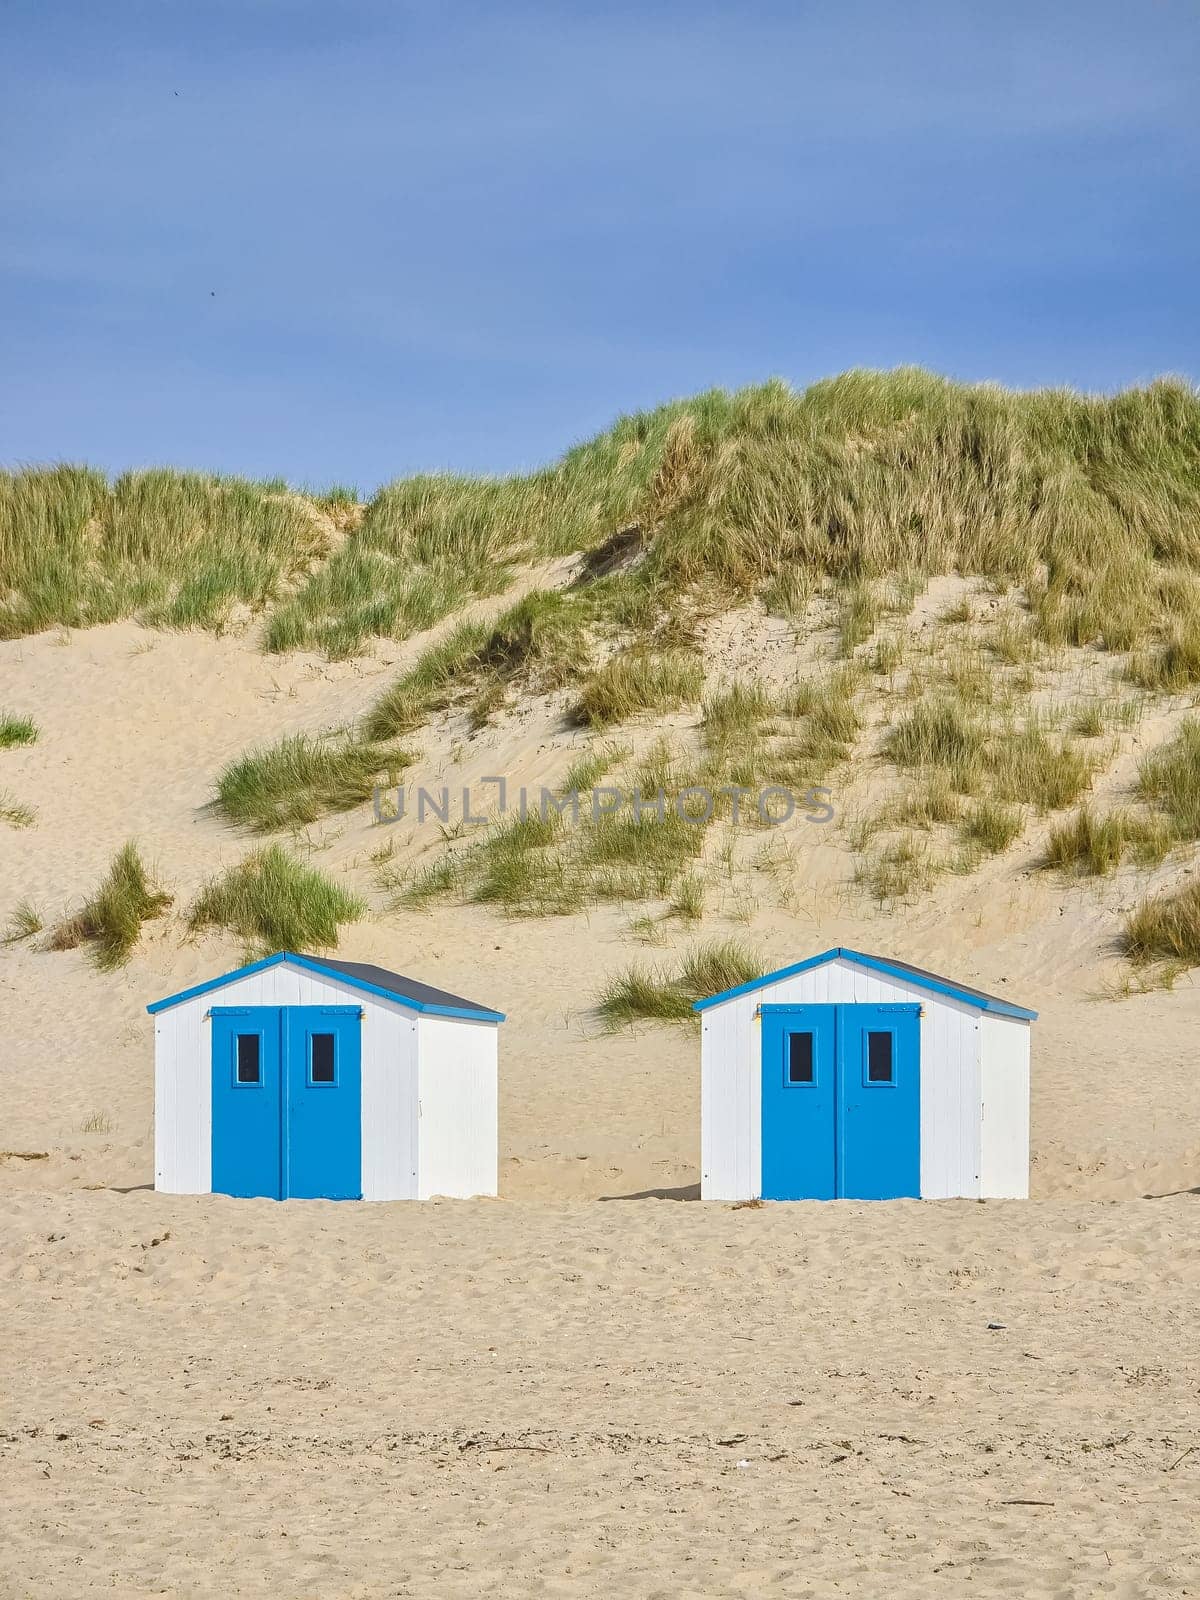 Three charming beach huts with blue doors stand on the sandy shores of Texel, Netherlands, against a backdrop of serene seaside beauty.